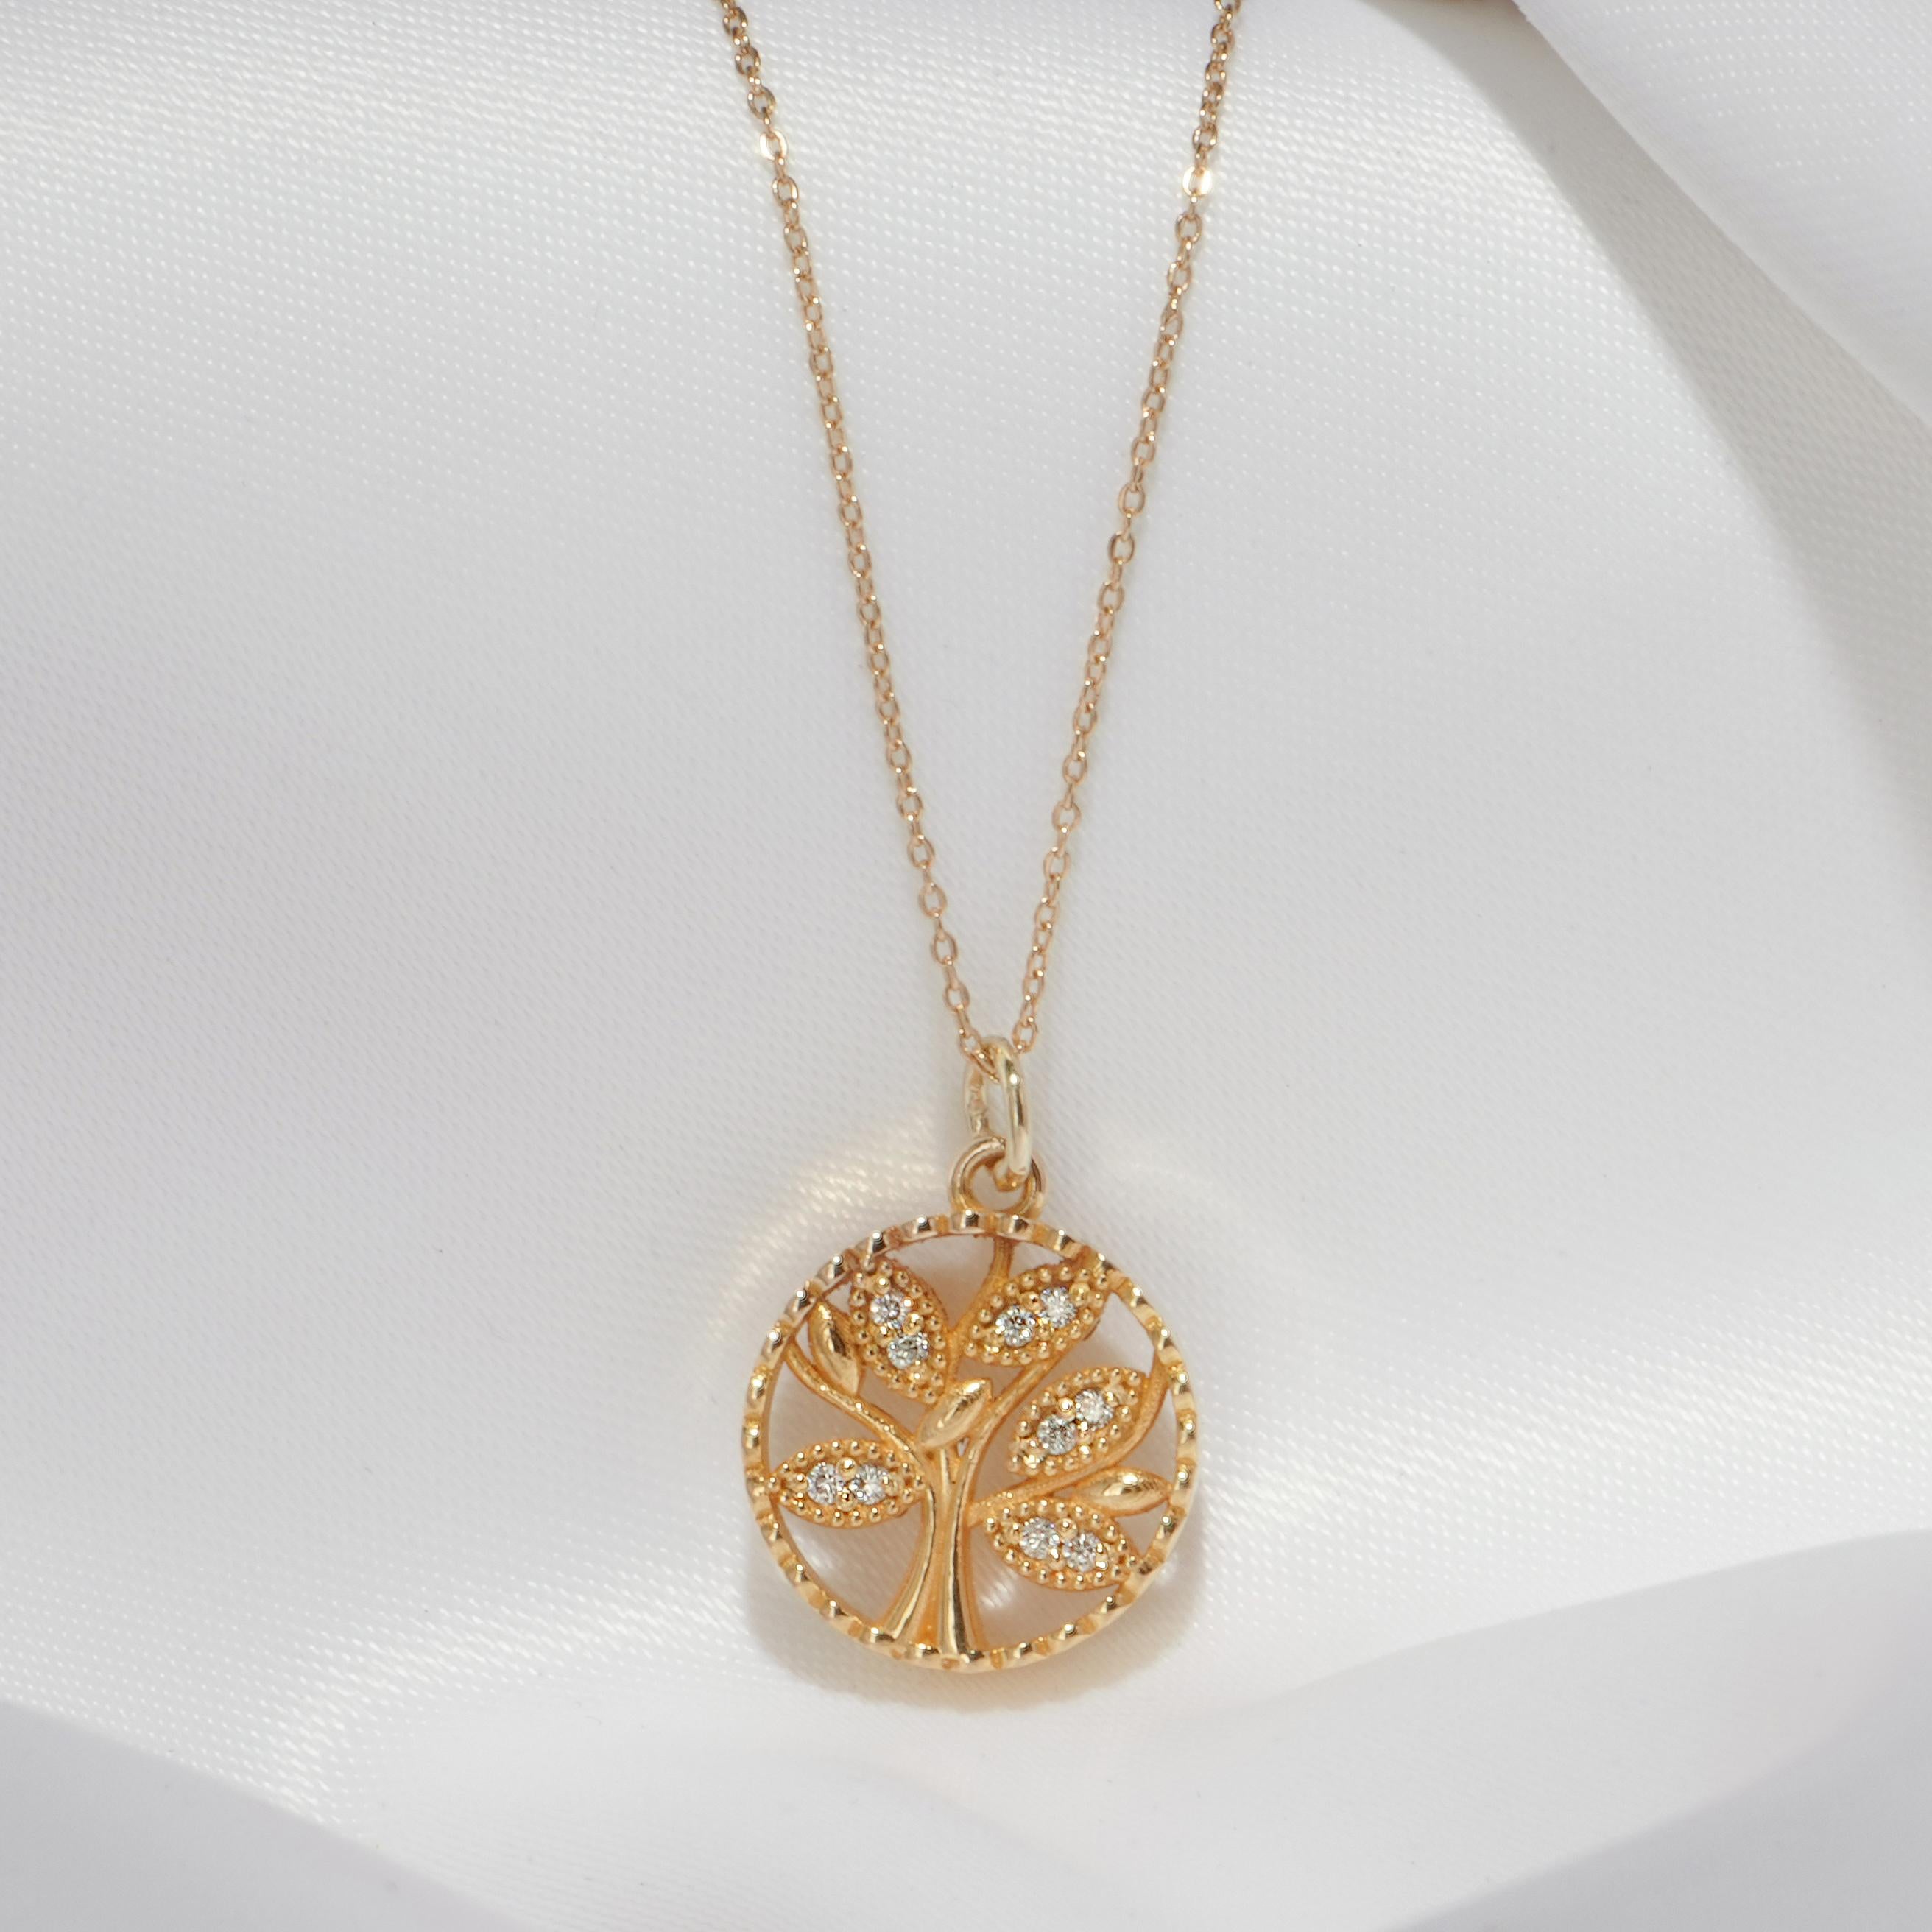 Do you love the symbol of life, growth, and connection? Do you want to own a pendant that is elegant, durable, and affordable? If so, you will love the 18k Solid Gold Tree of Life Pendant!

This pendant is made of 18k solid gold and features a